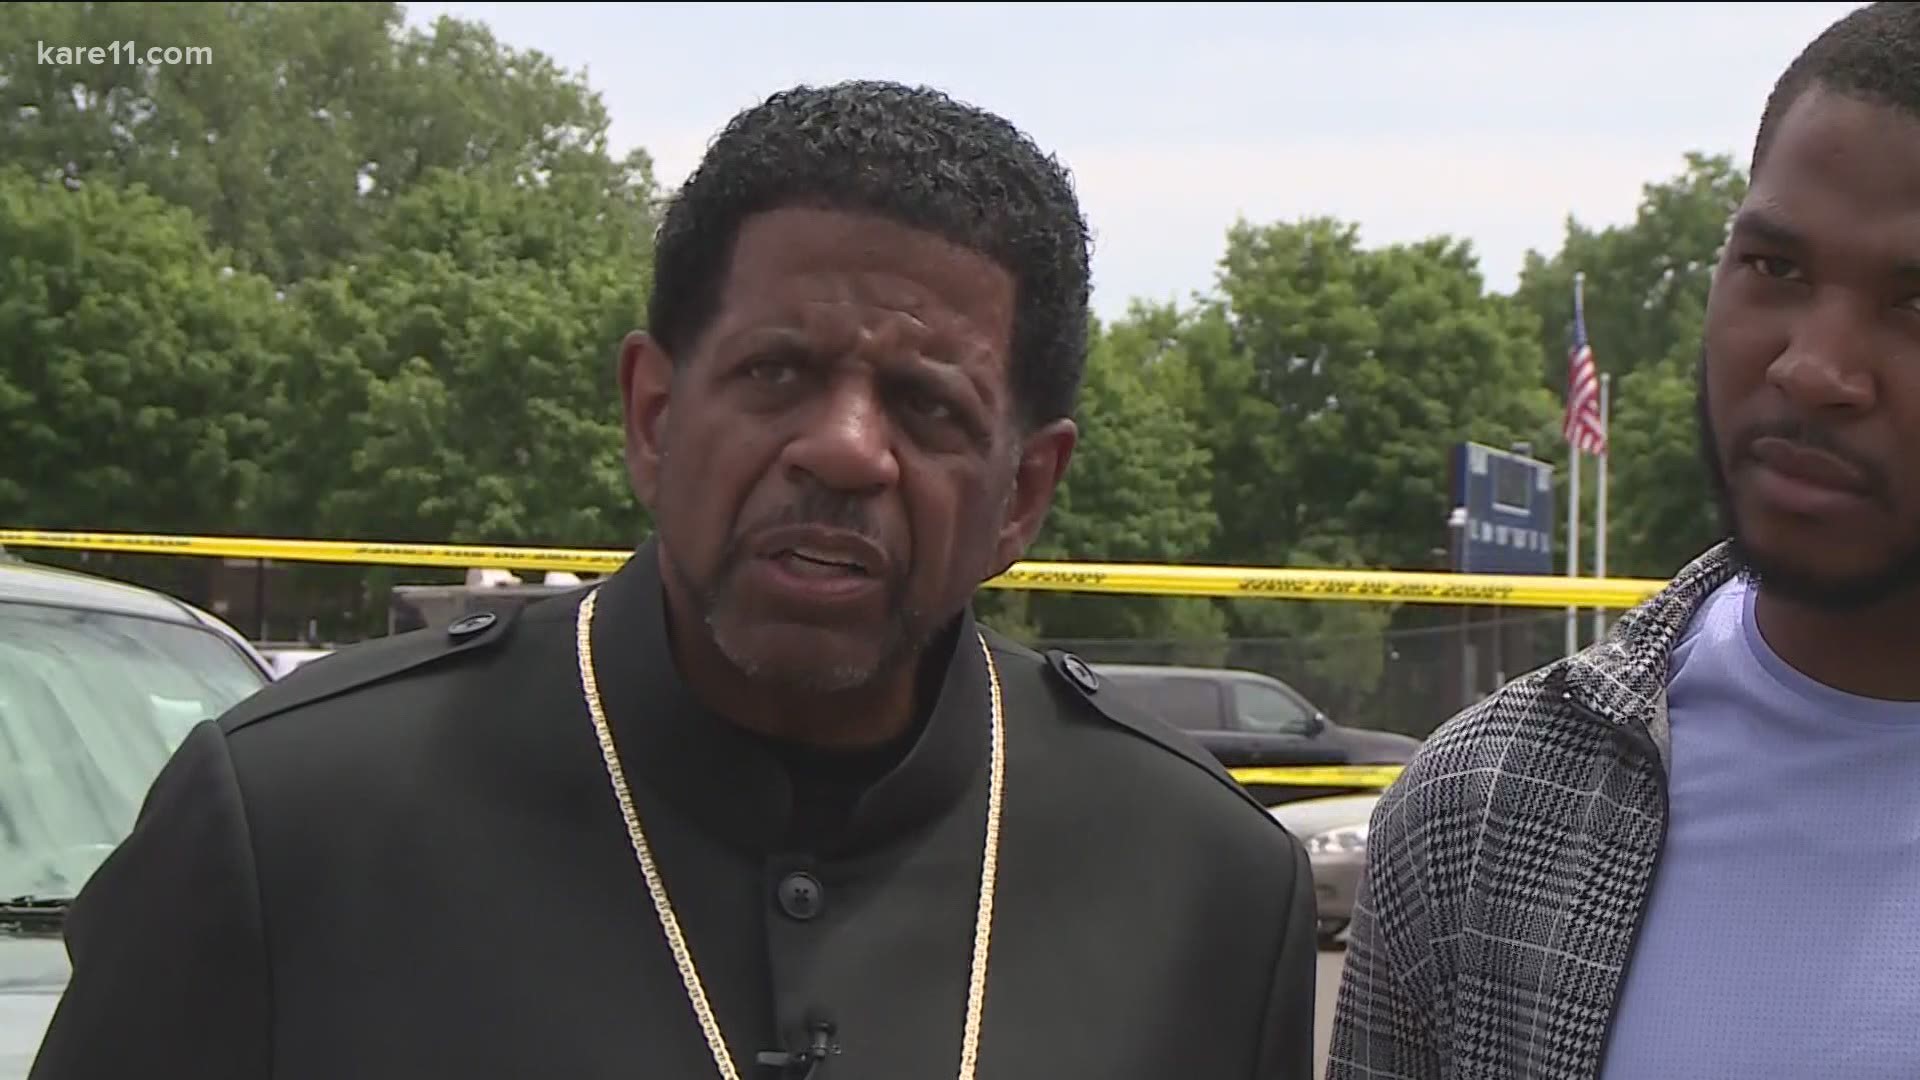 Bishop Richard Howell confirmed for KARE 11 that the shooting happened at Shiloh Temple, where a funeral was being held for Christopher Jones Jr.